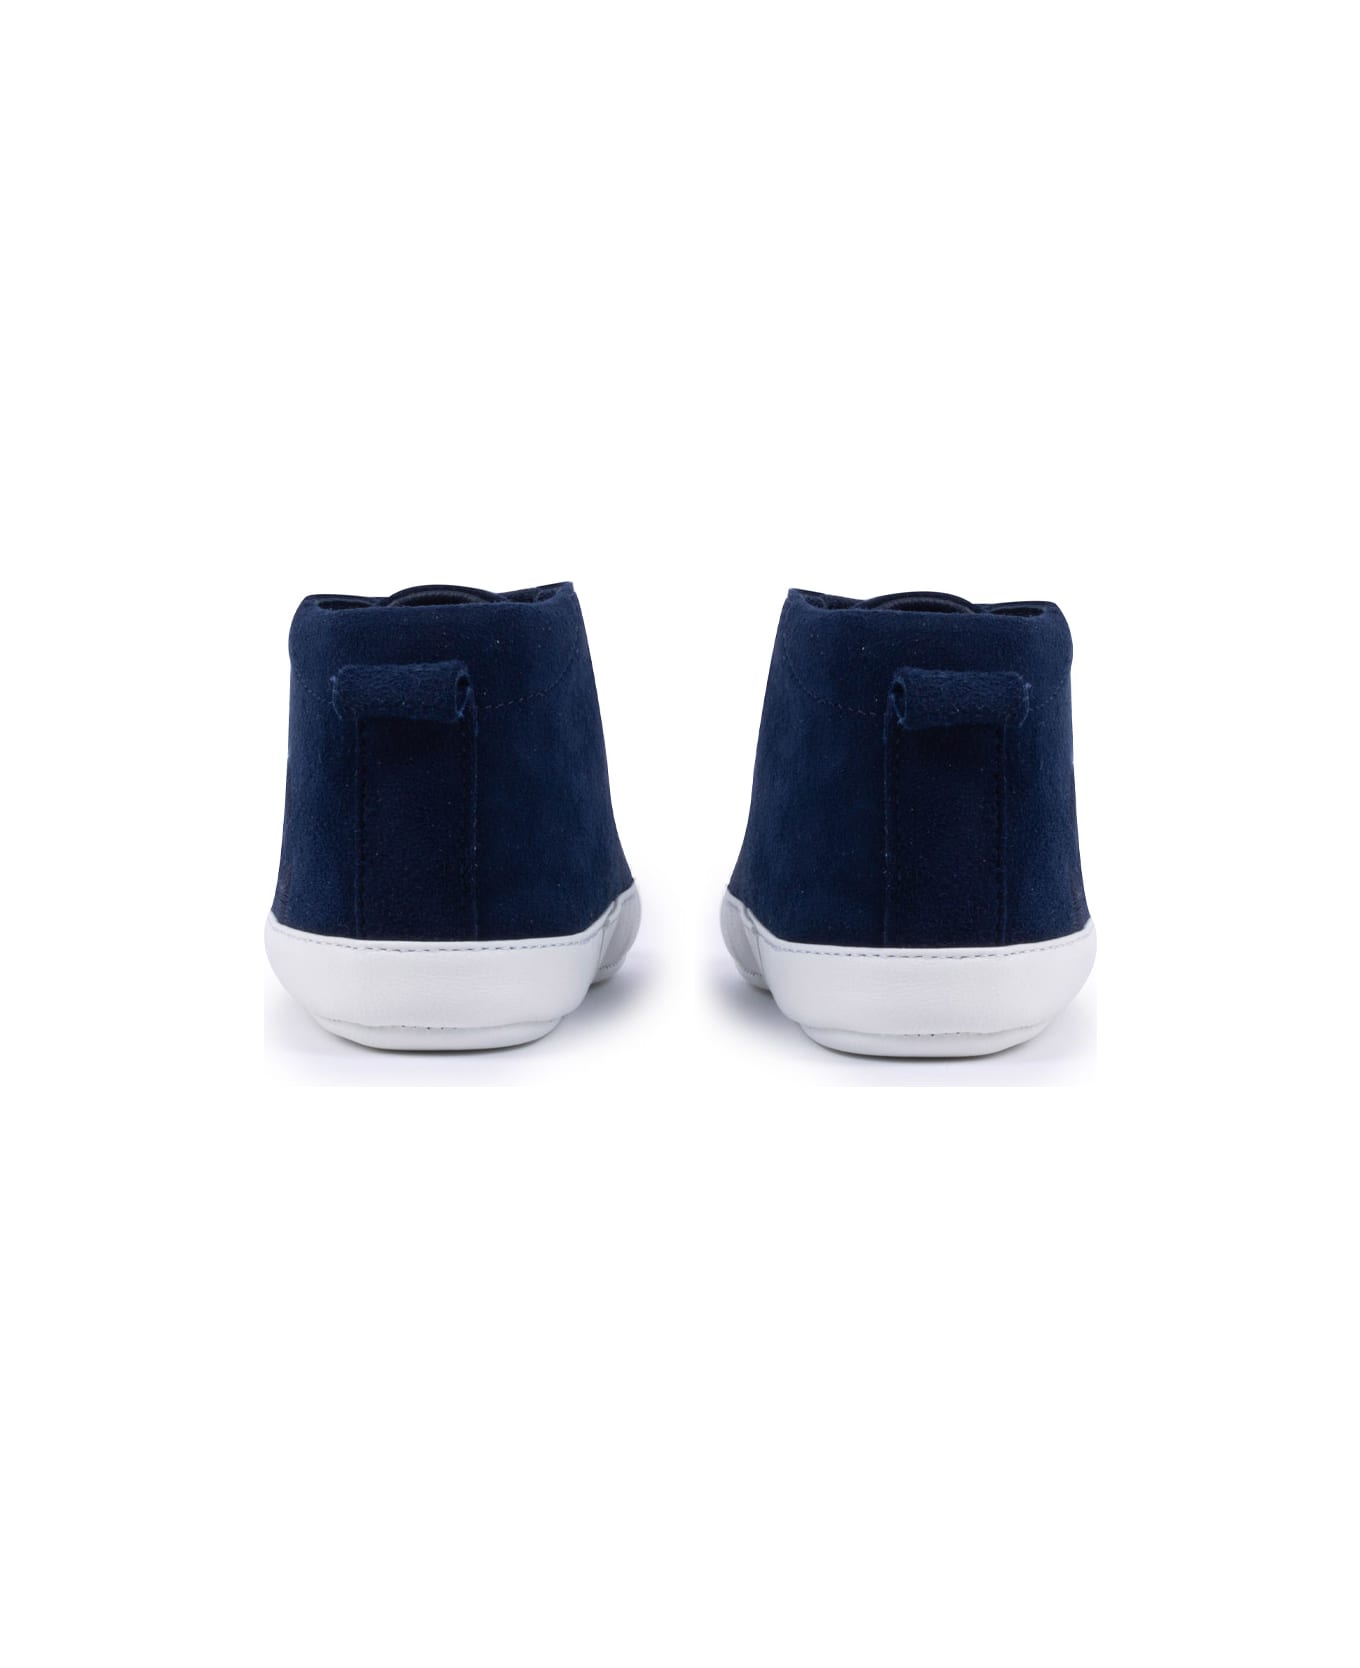 Dolce & Gabbana Suede Sneakers With Dg Logo Embroidery - Blue